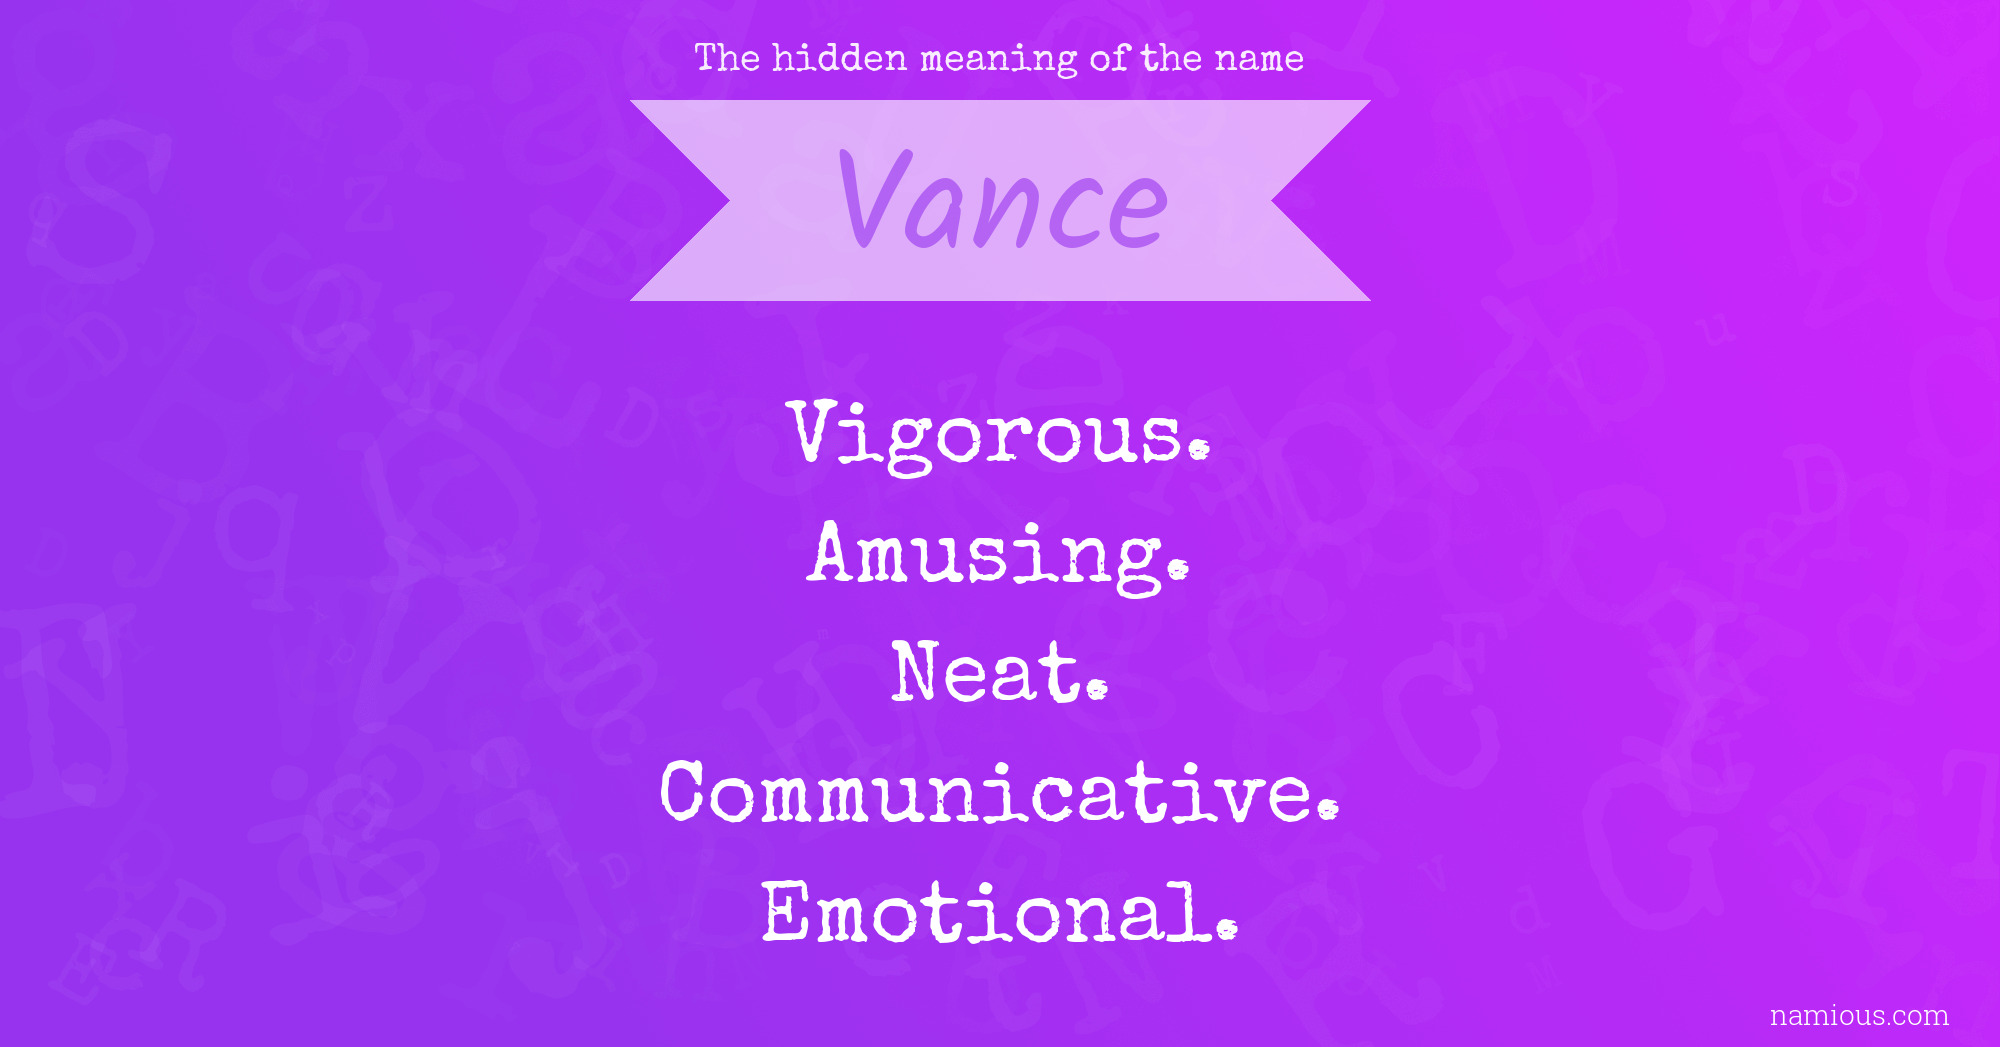 The hidden meaning of the name Vance | Namious